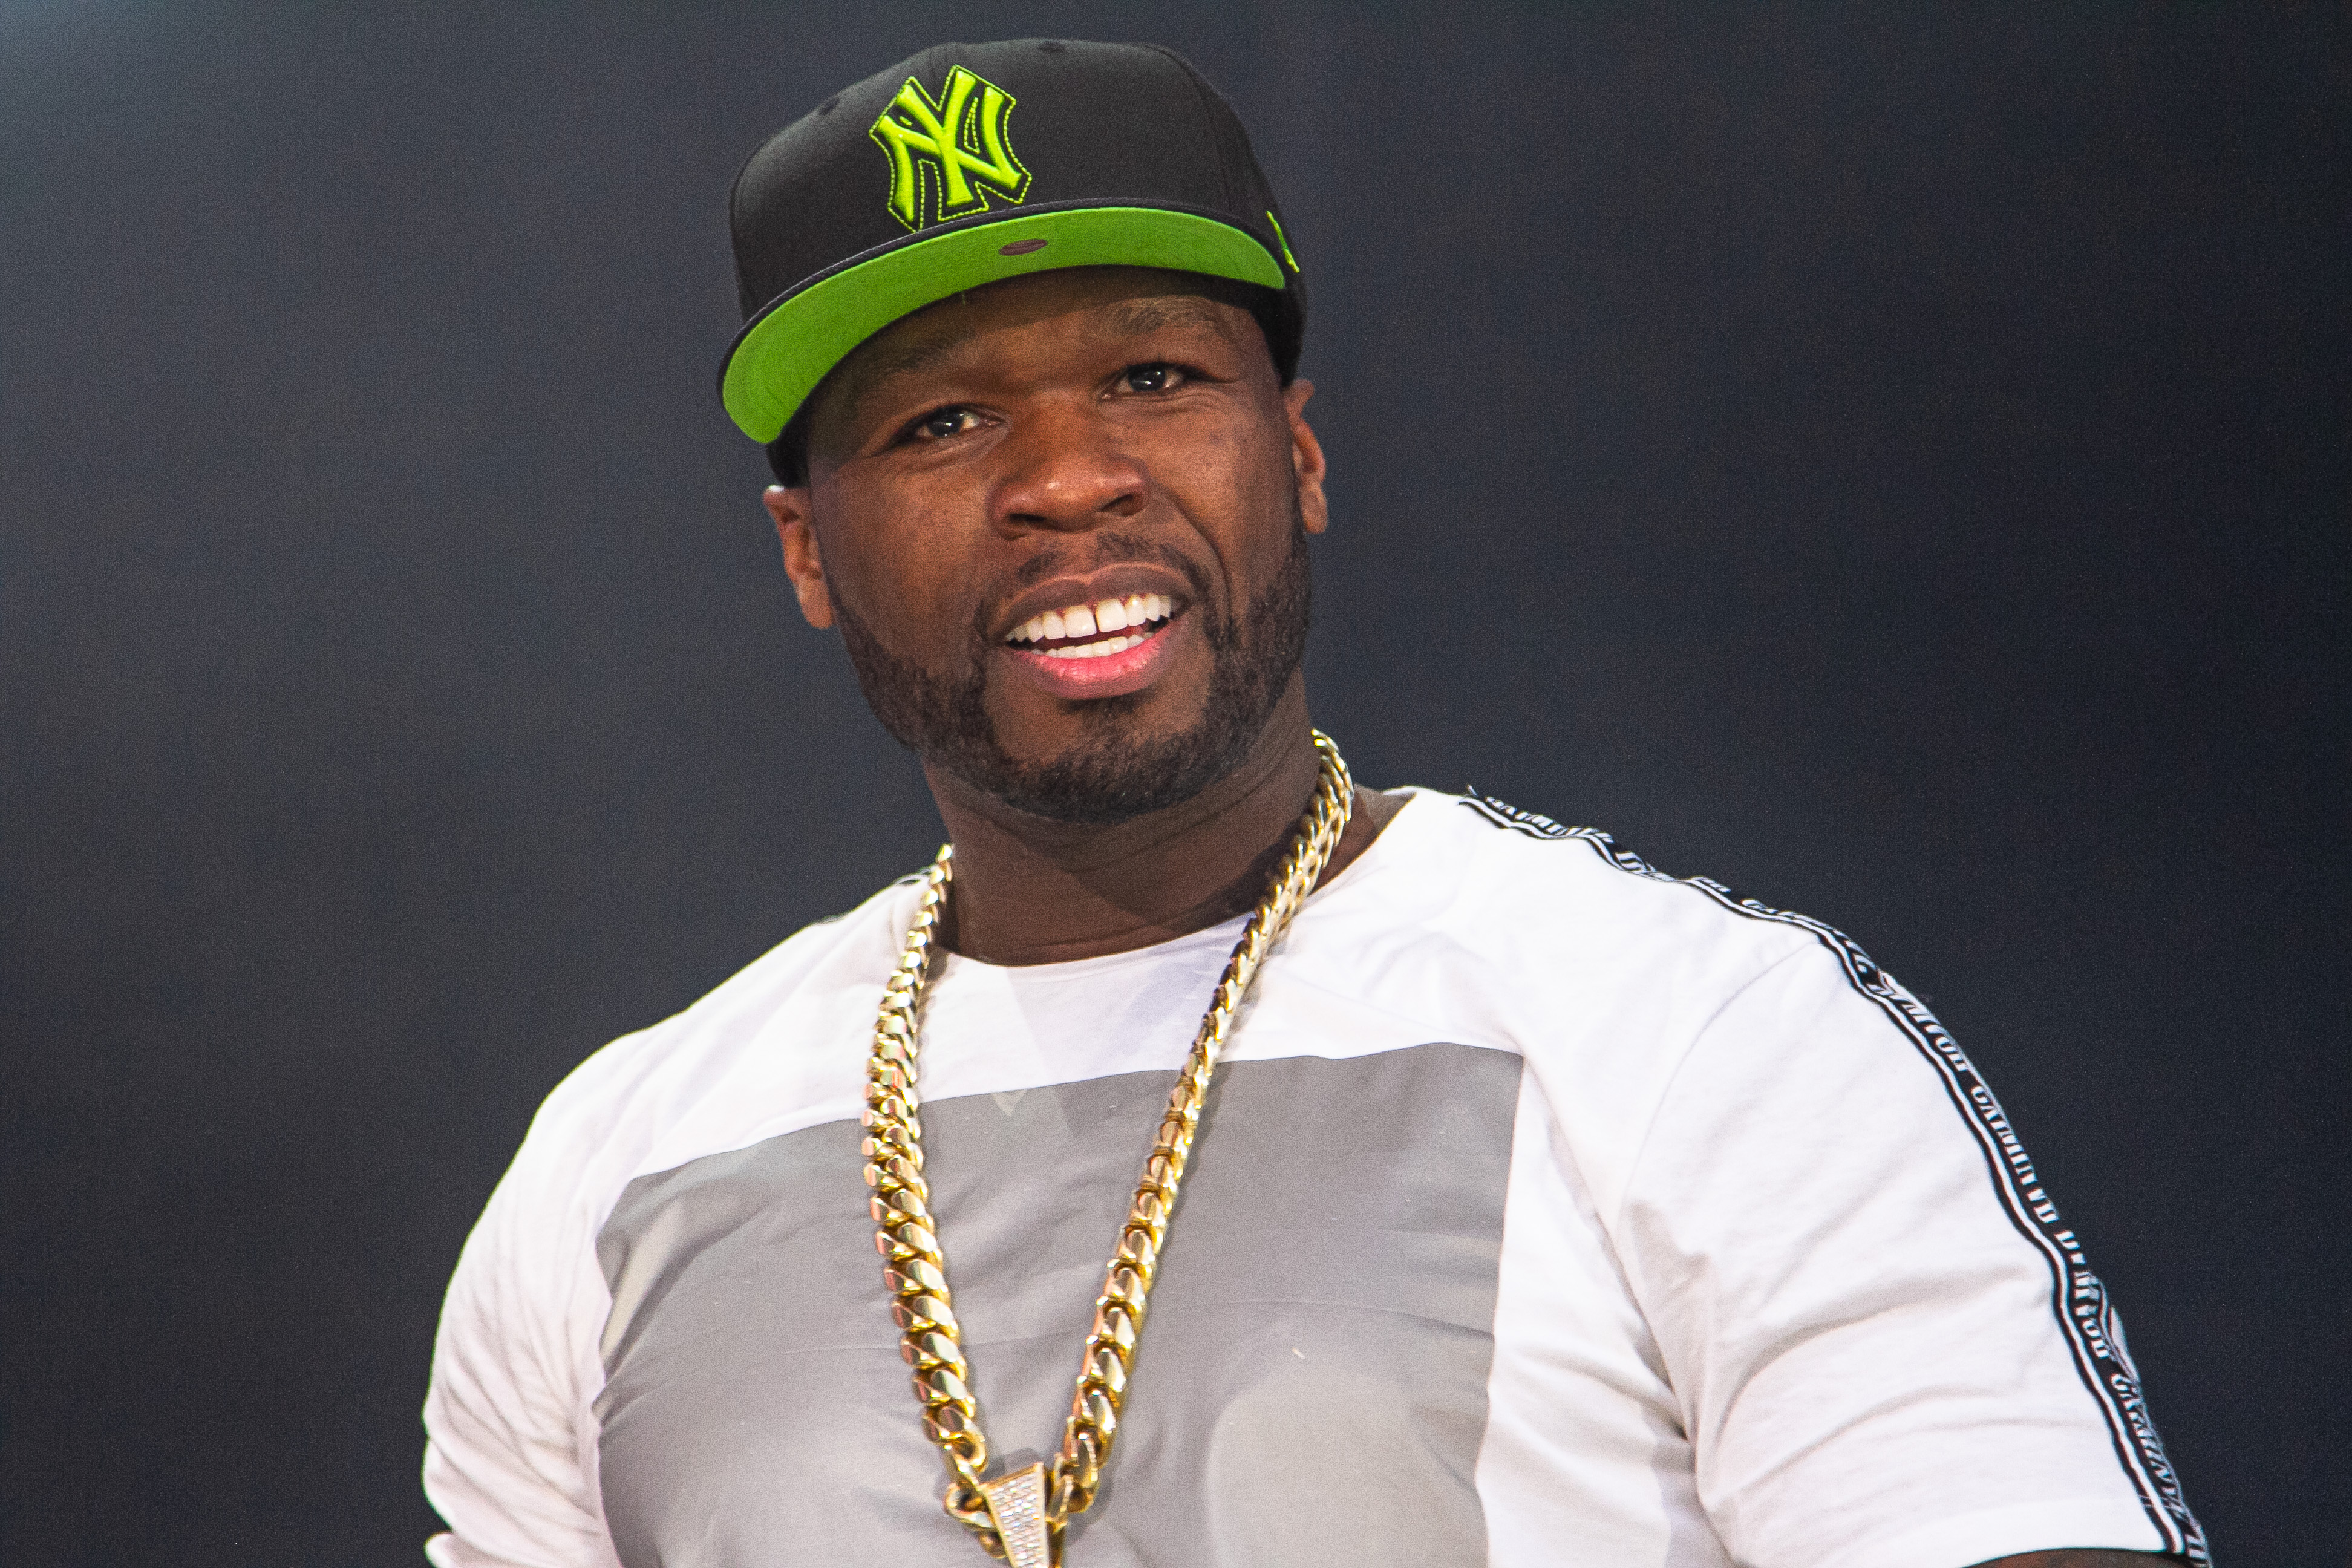 50 Cent Says He Is Bringing Back Original "Big Rich Town" Song